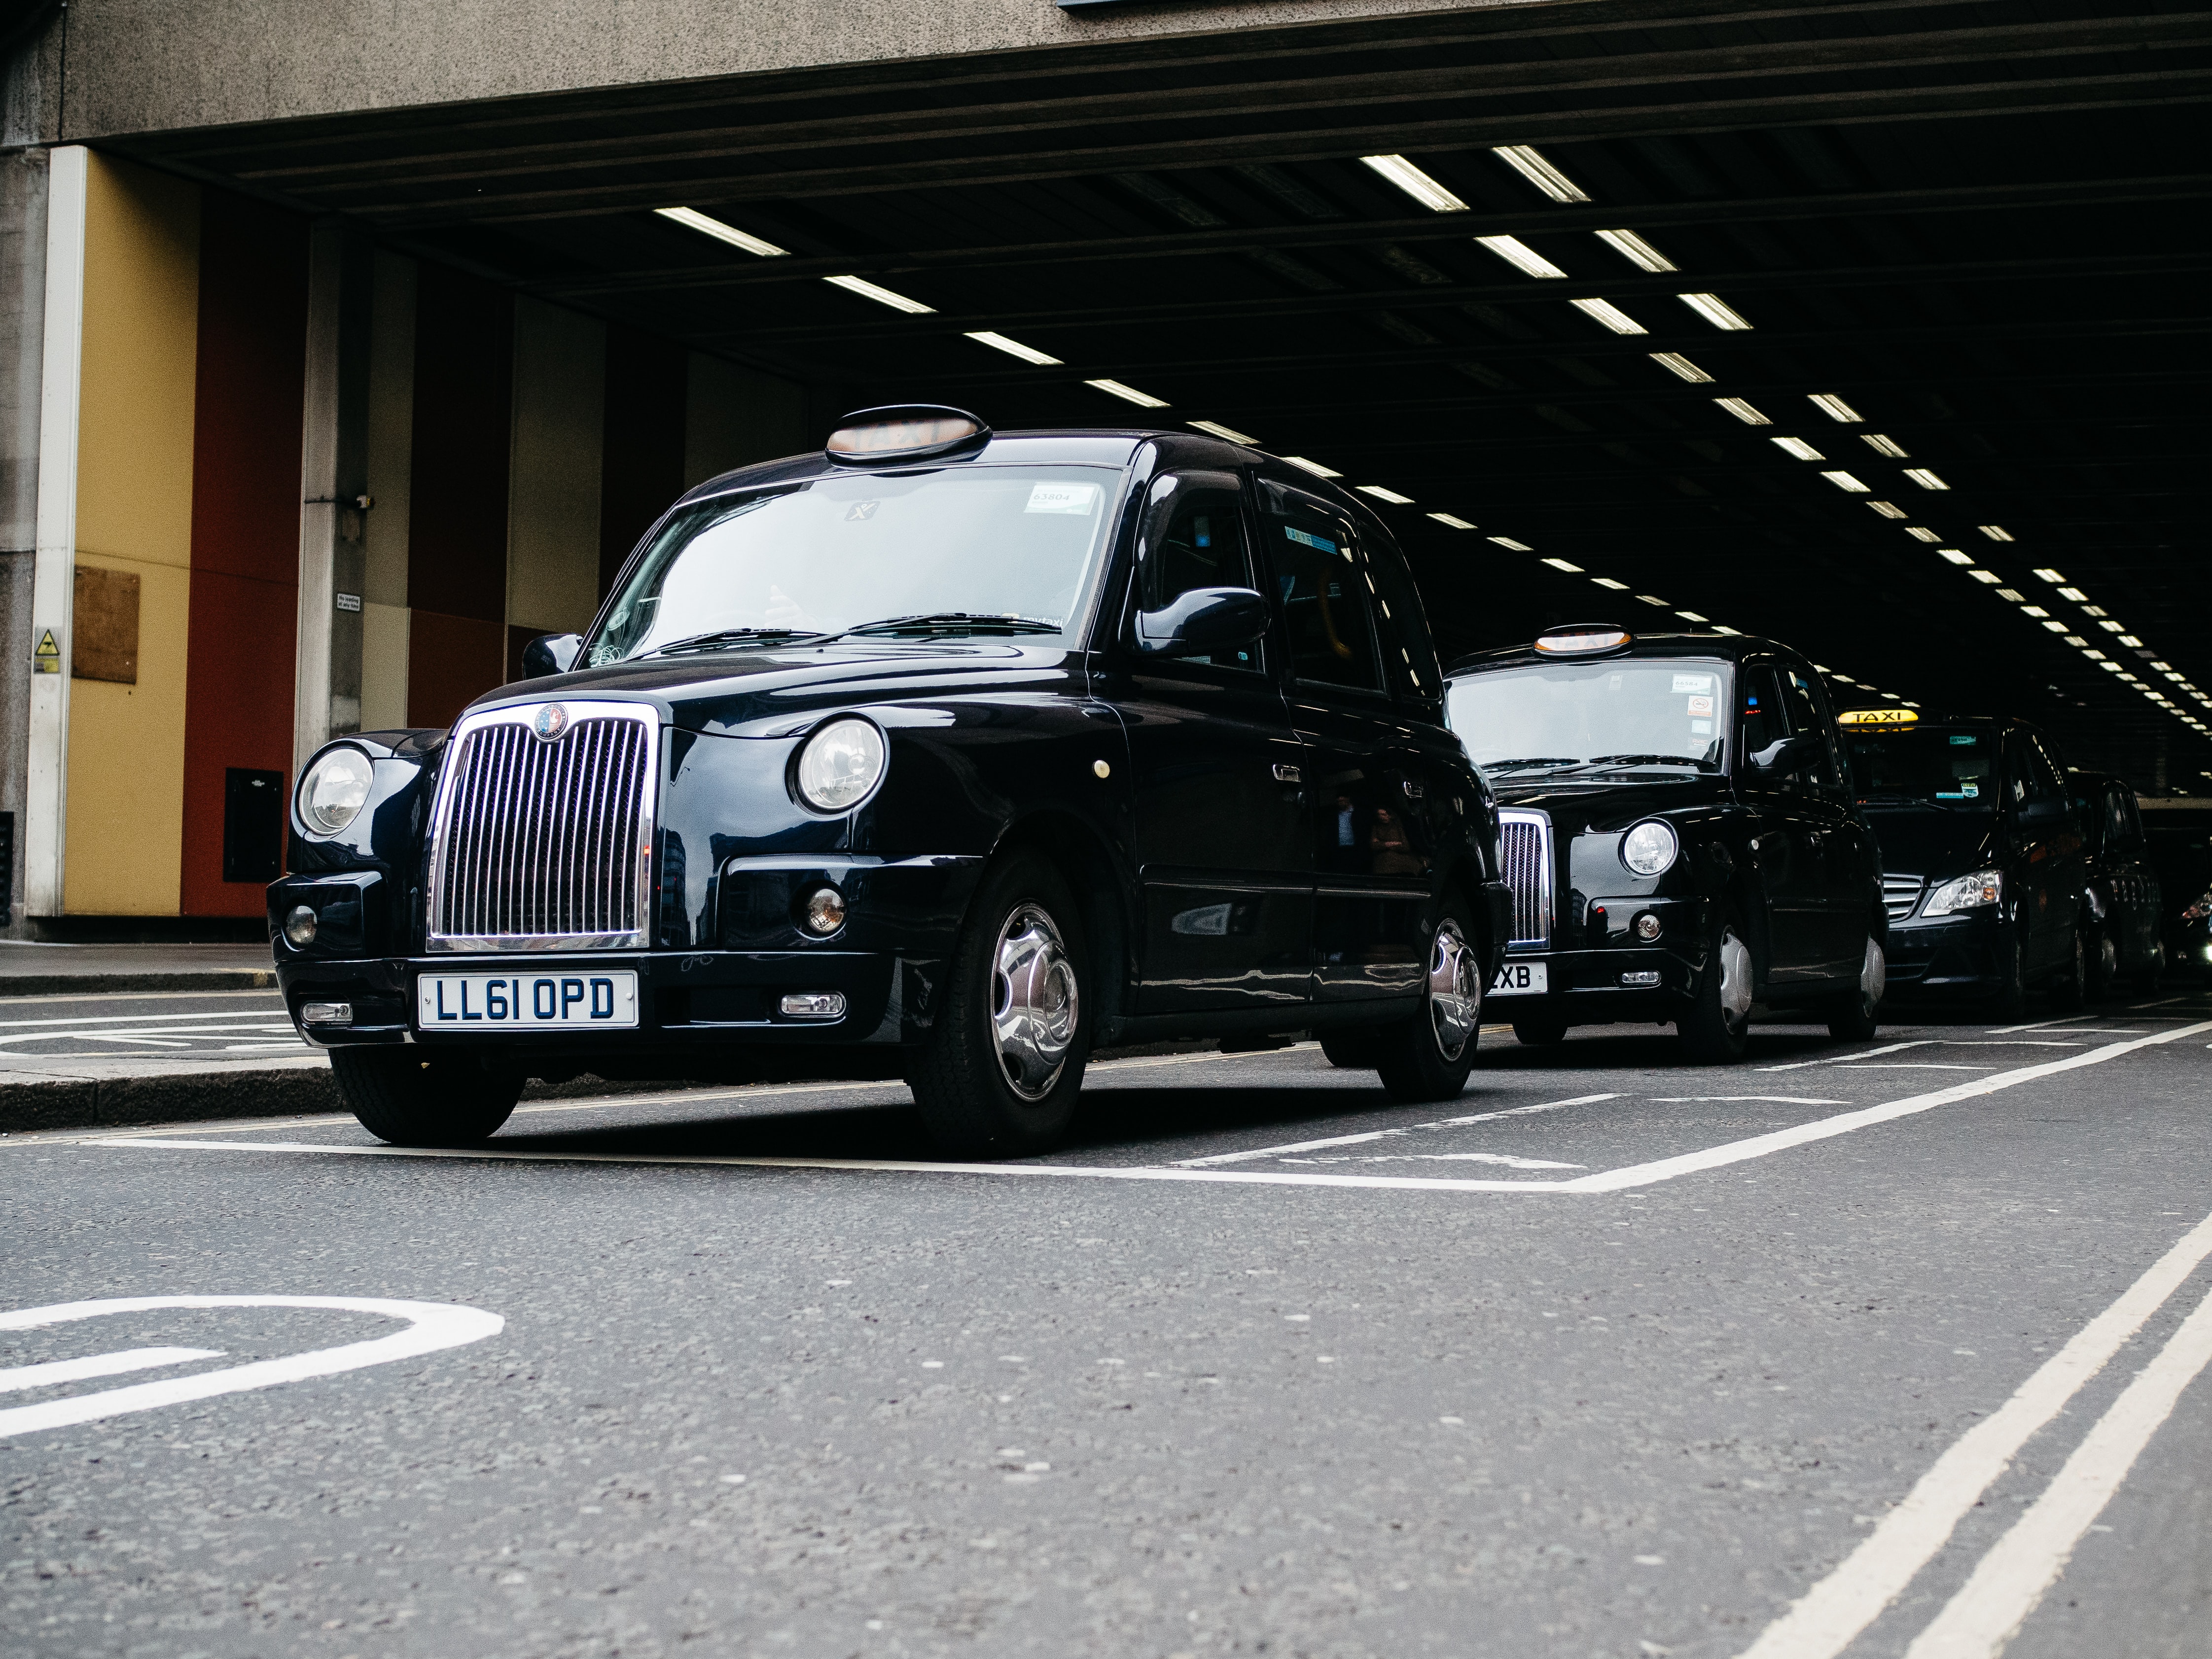 Vitale. Tradex. Hackney Taxis driving out of tunnel